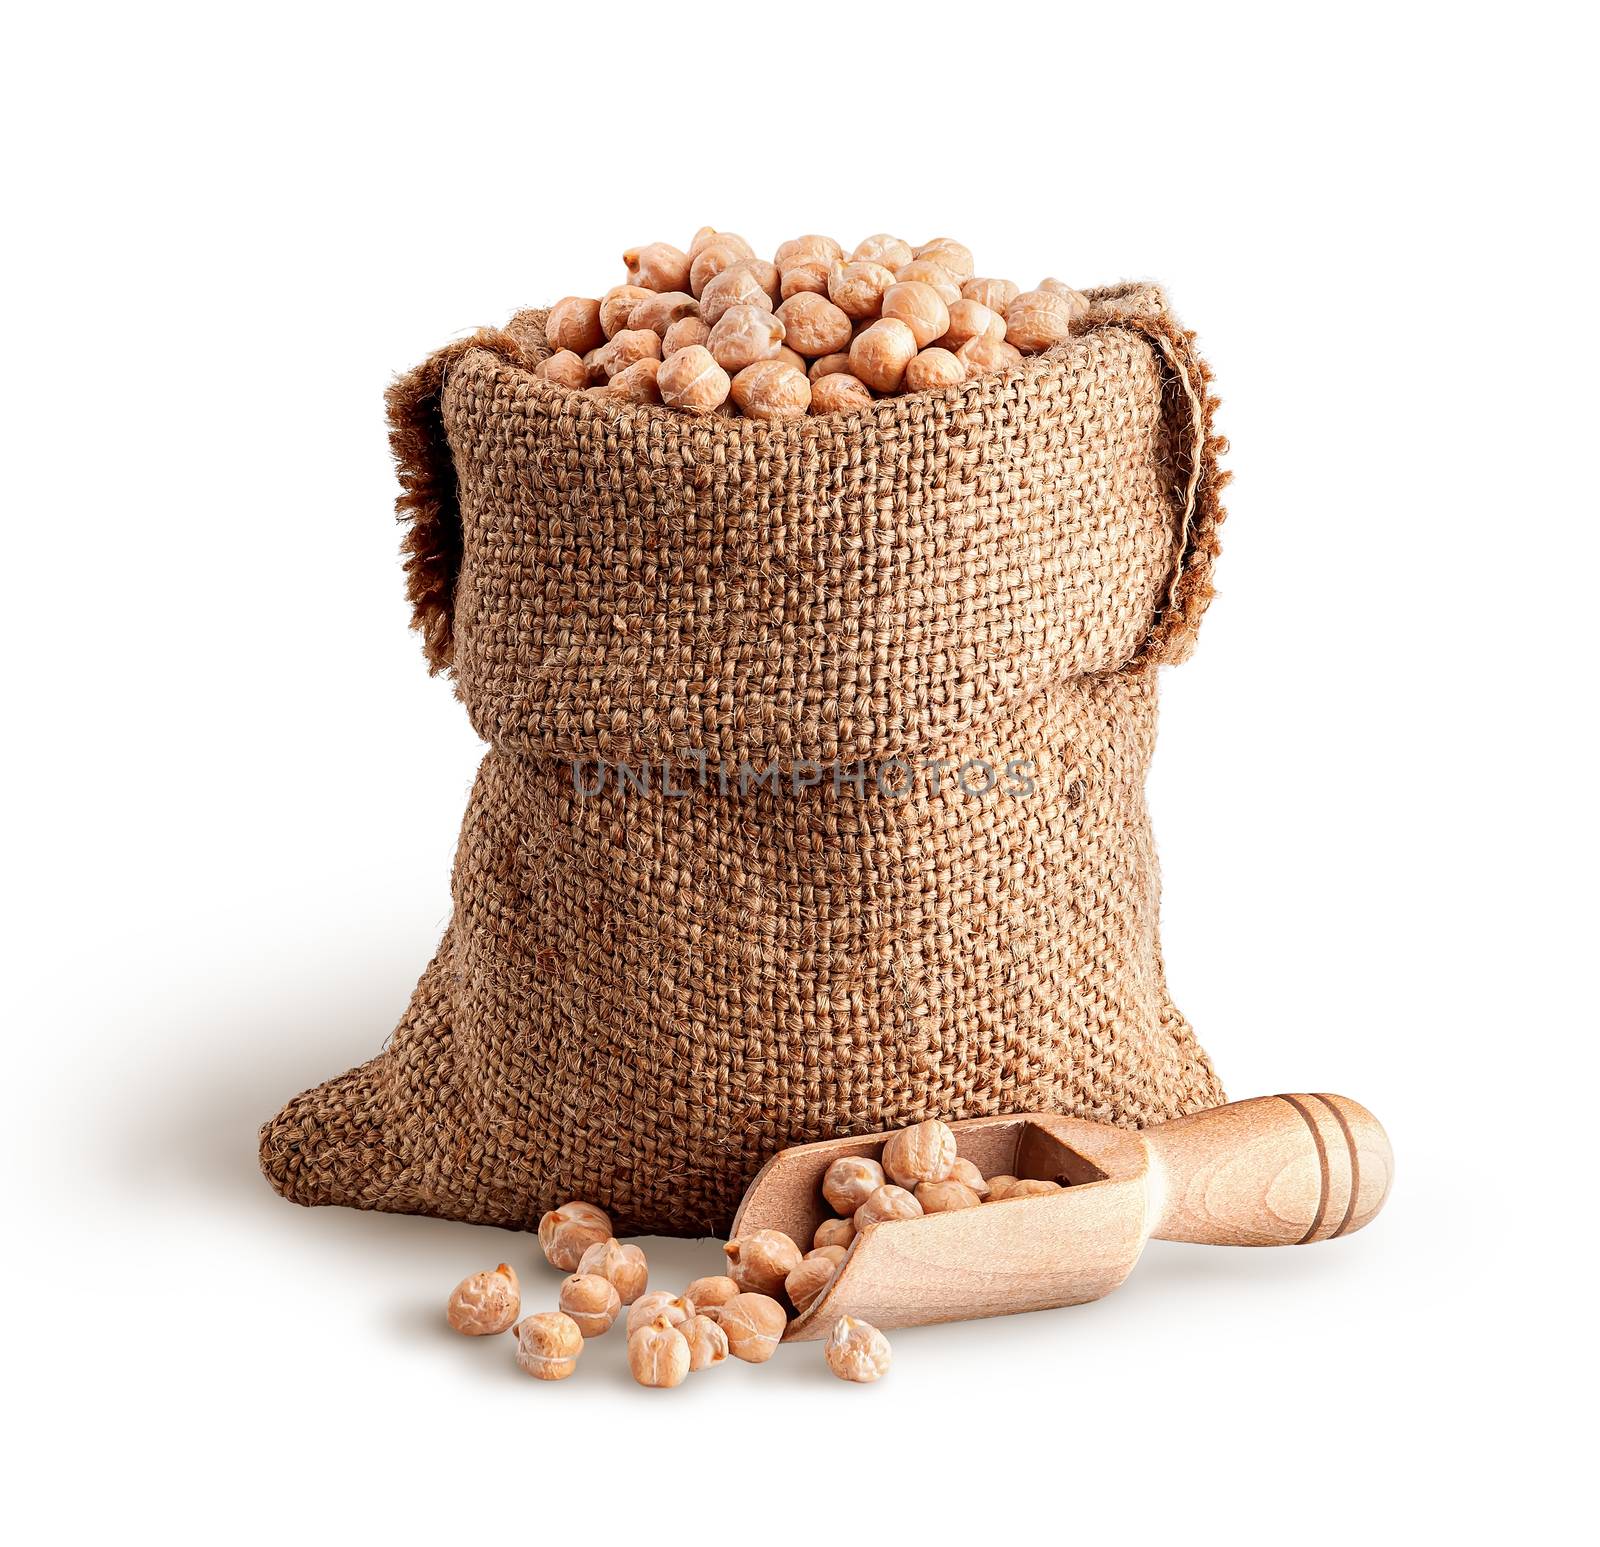 Sack with dry chickpeas and scoop by Cipariss